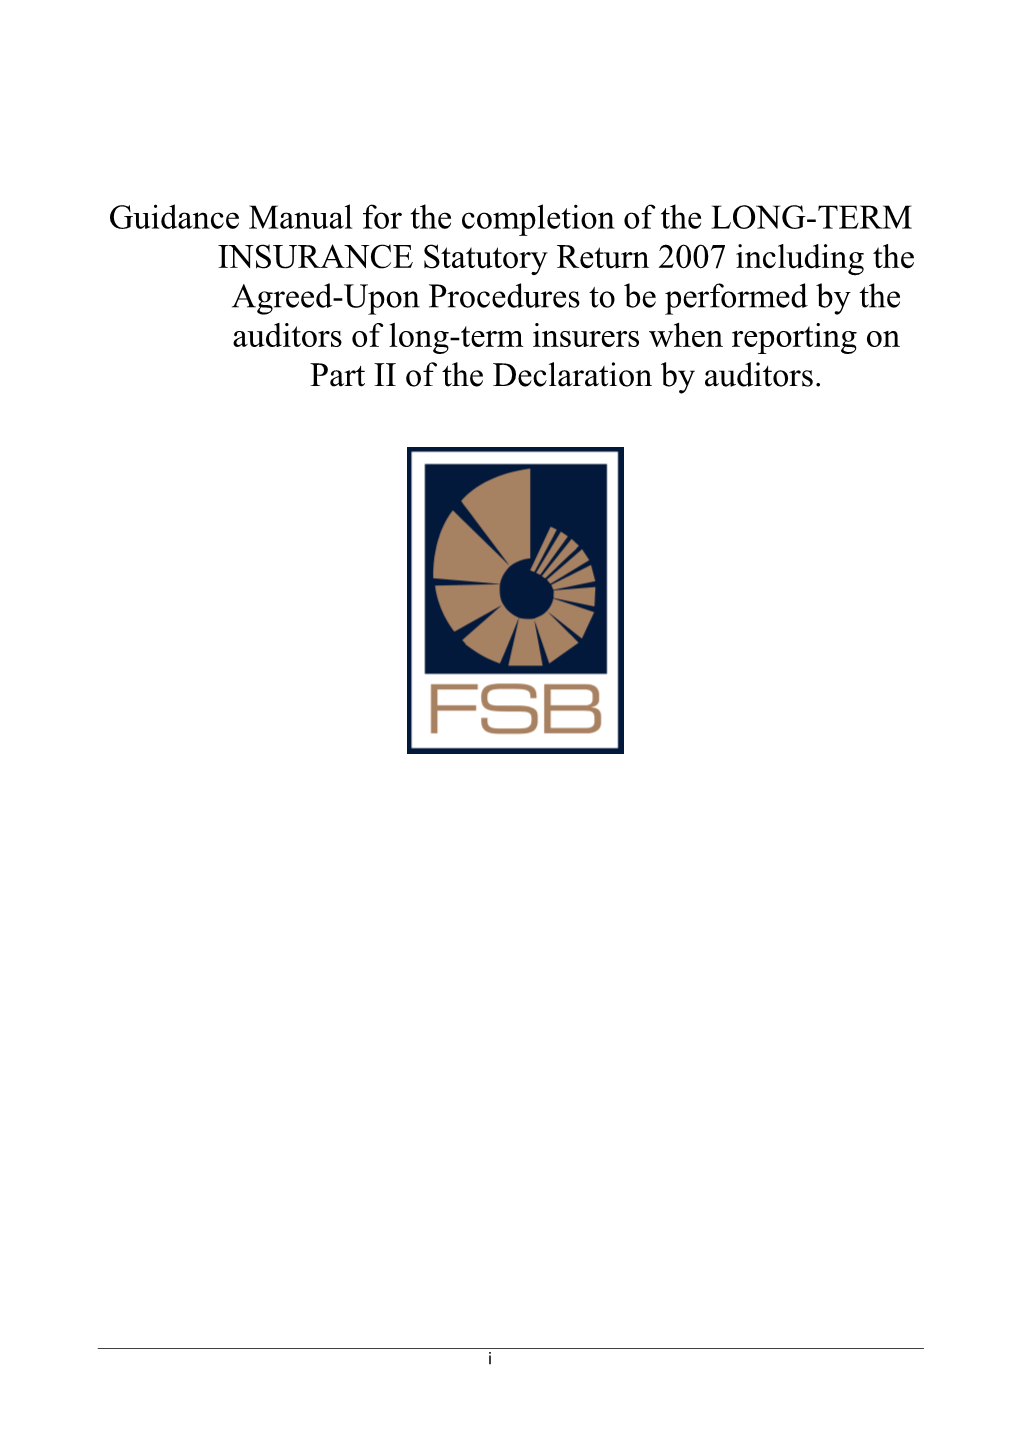 Guidance Manual for the Completion of the LONG-TERM INSURANCE Statutory Return 2007 Including